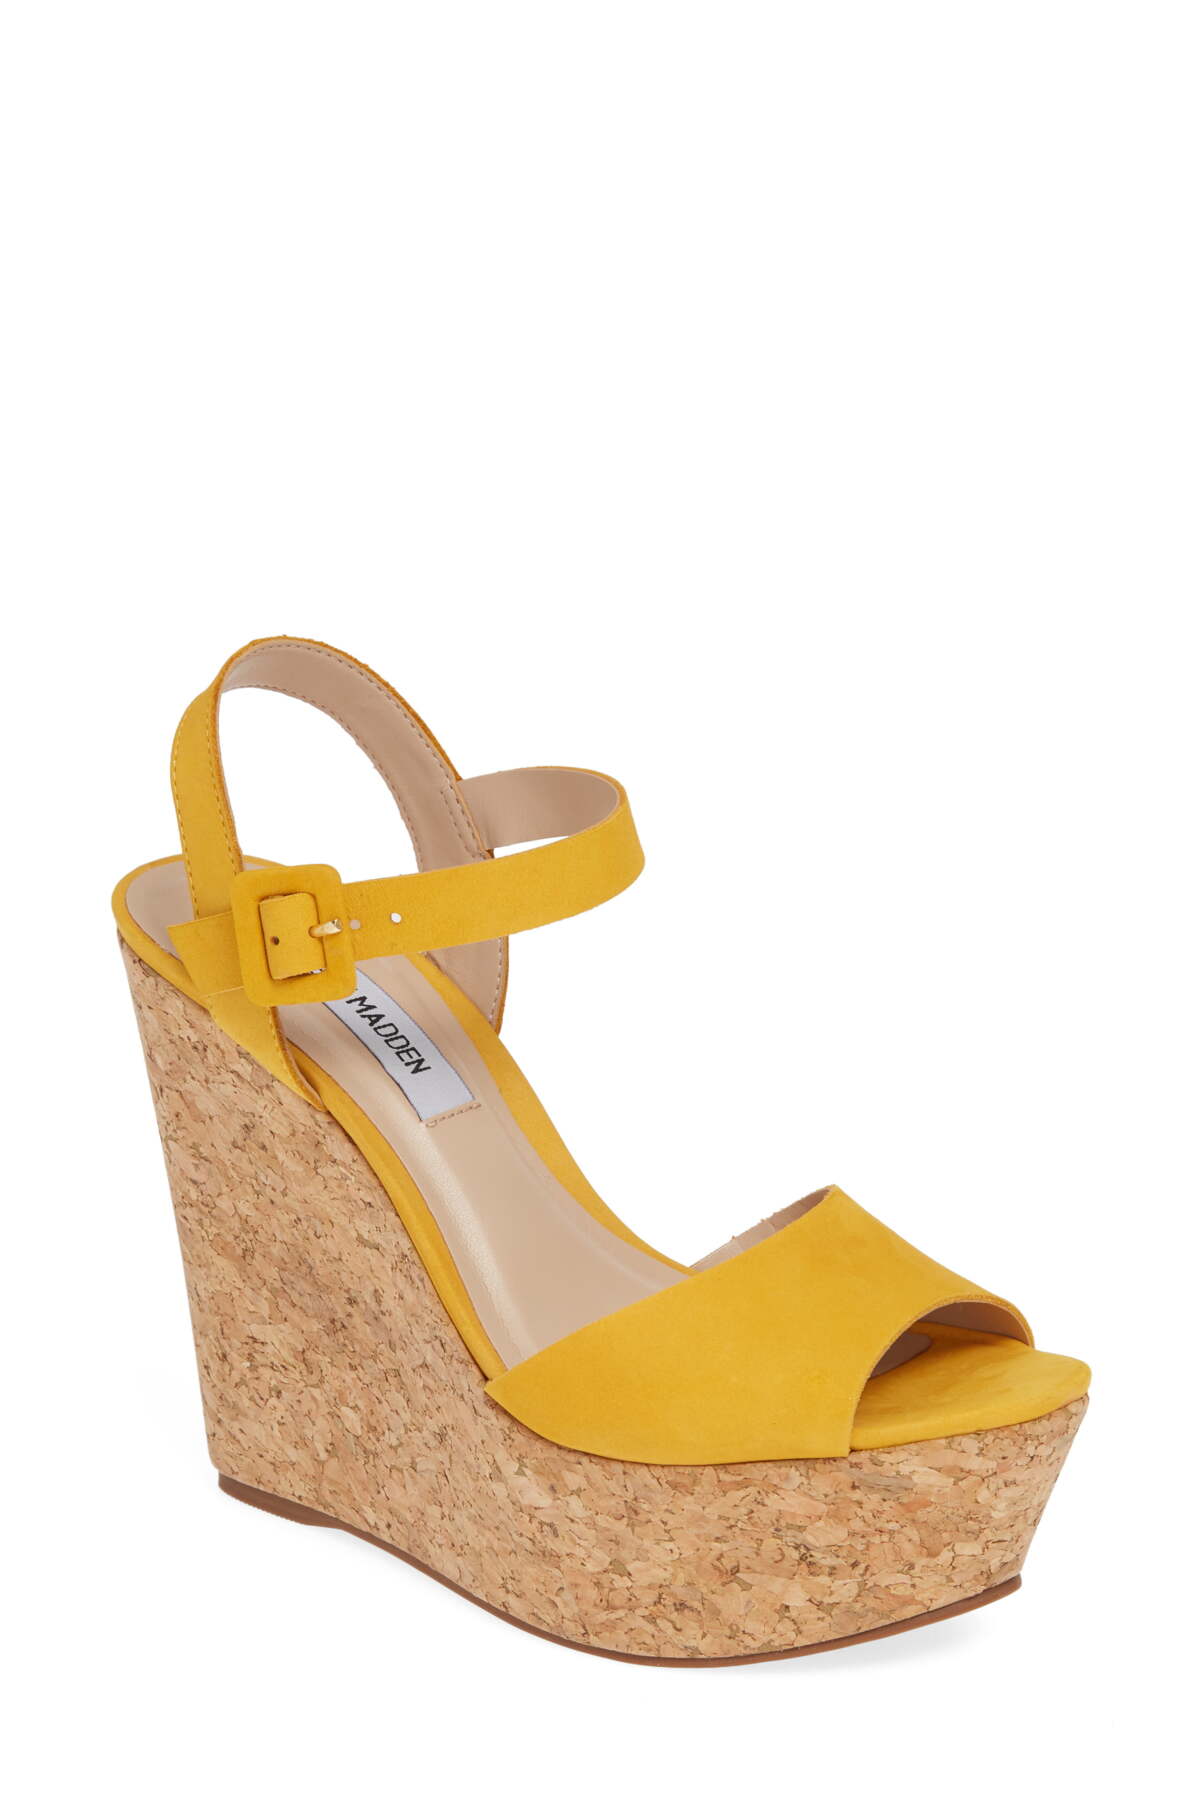 yellow wedge sandals